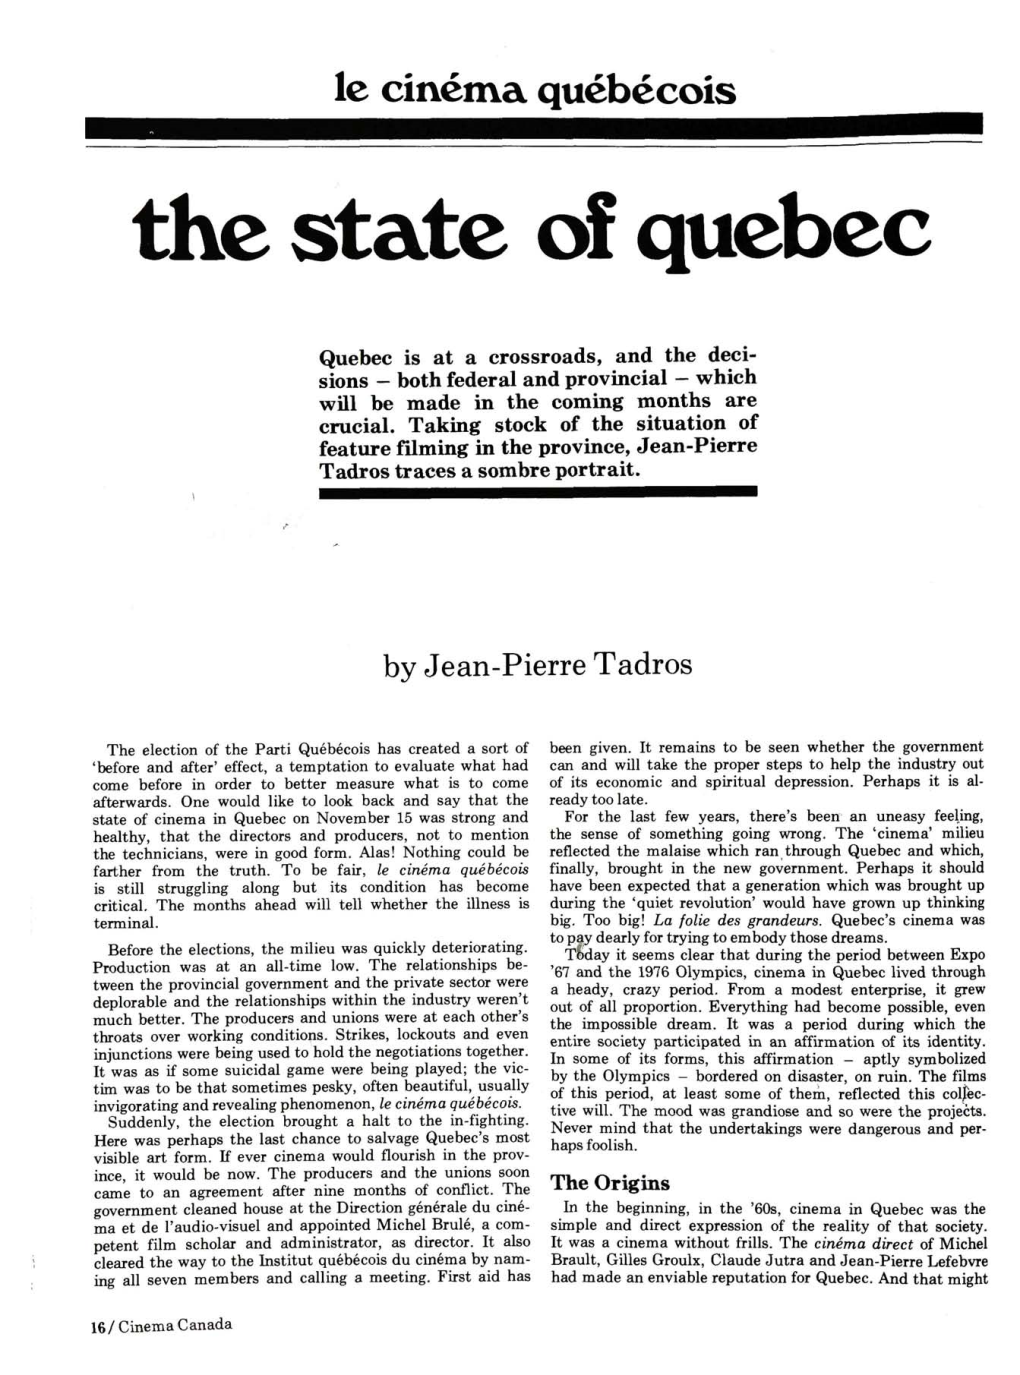 The State of Quebec